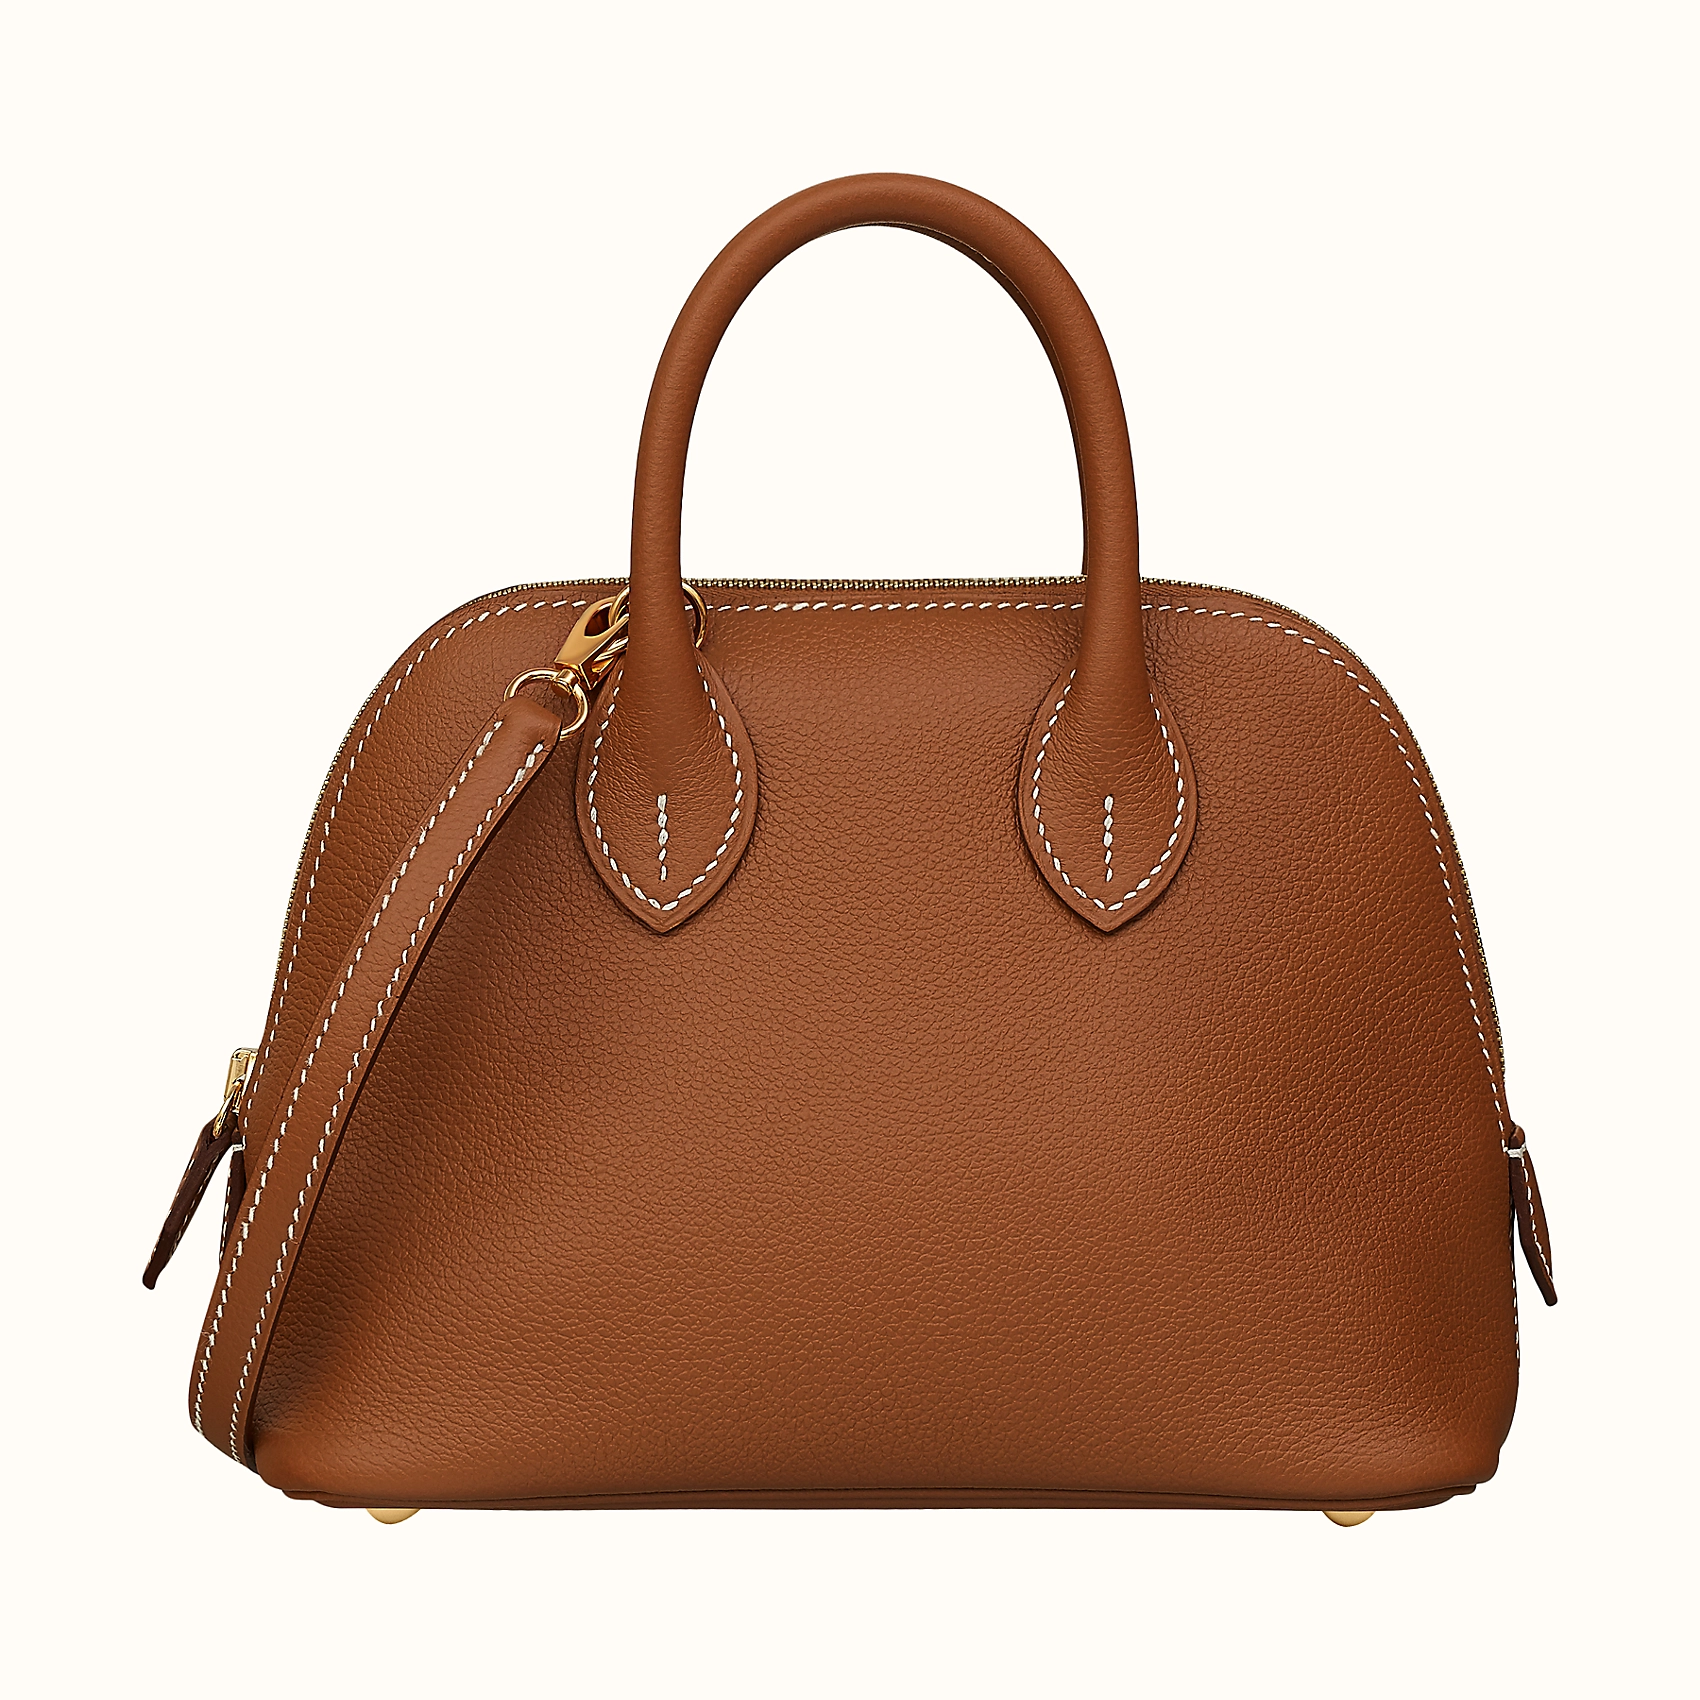 The Best Hermès Bags for Every Budget